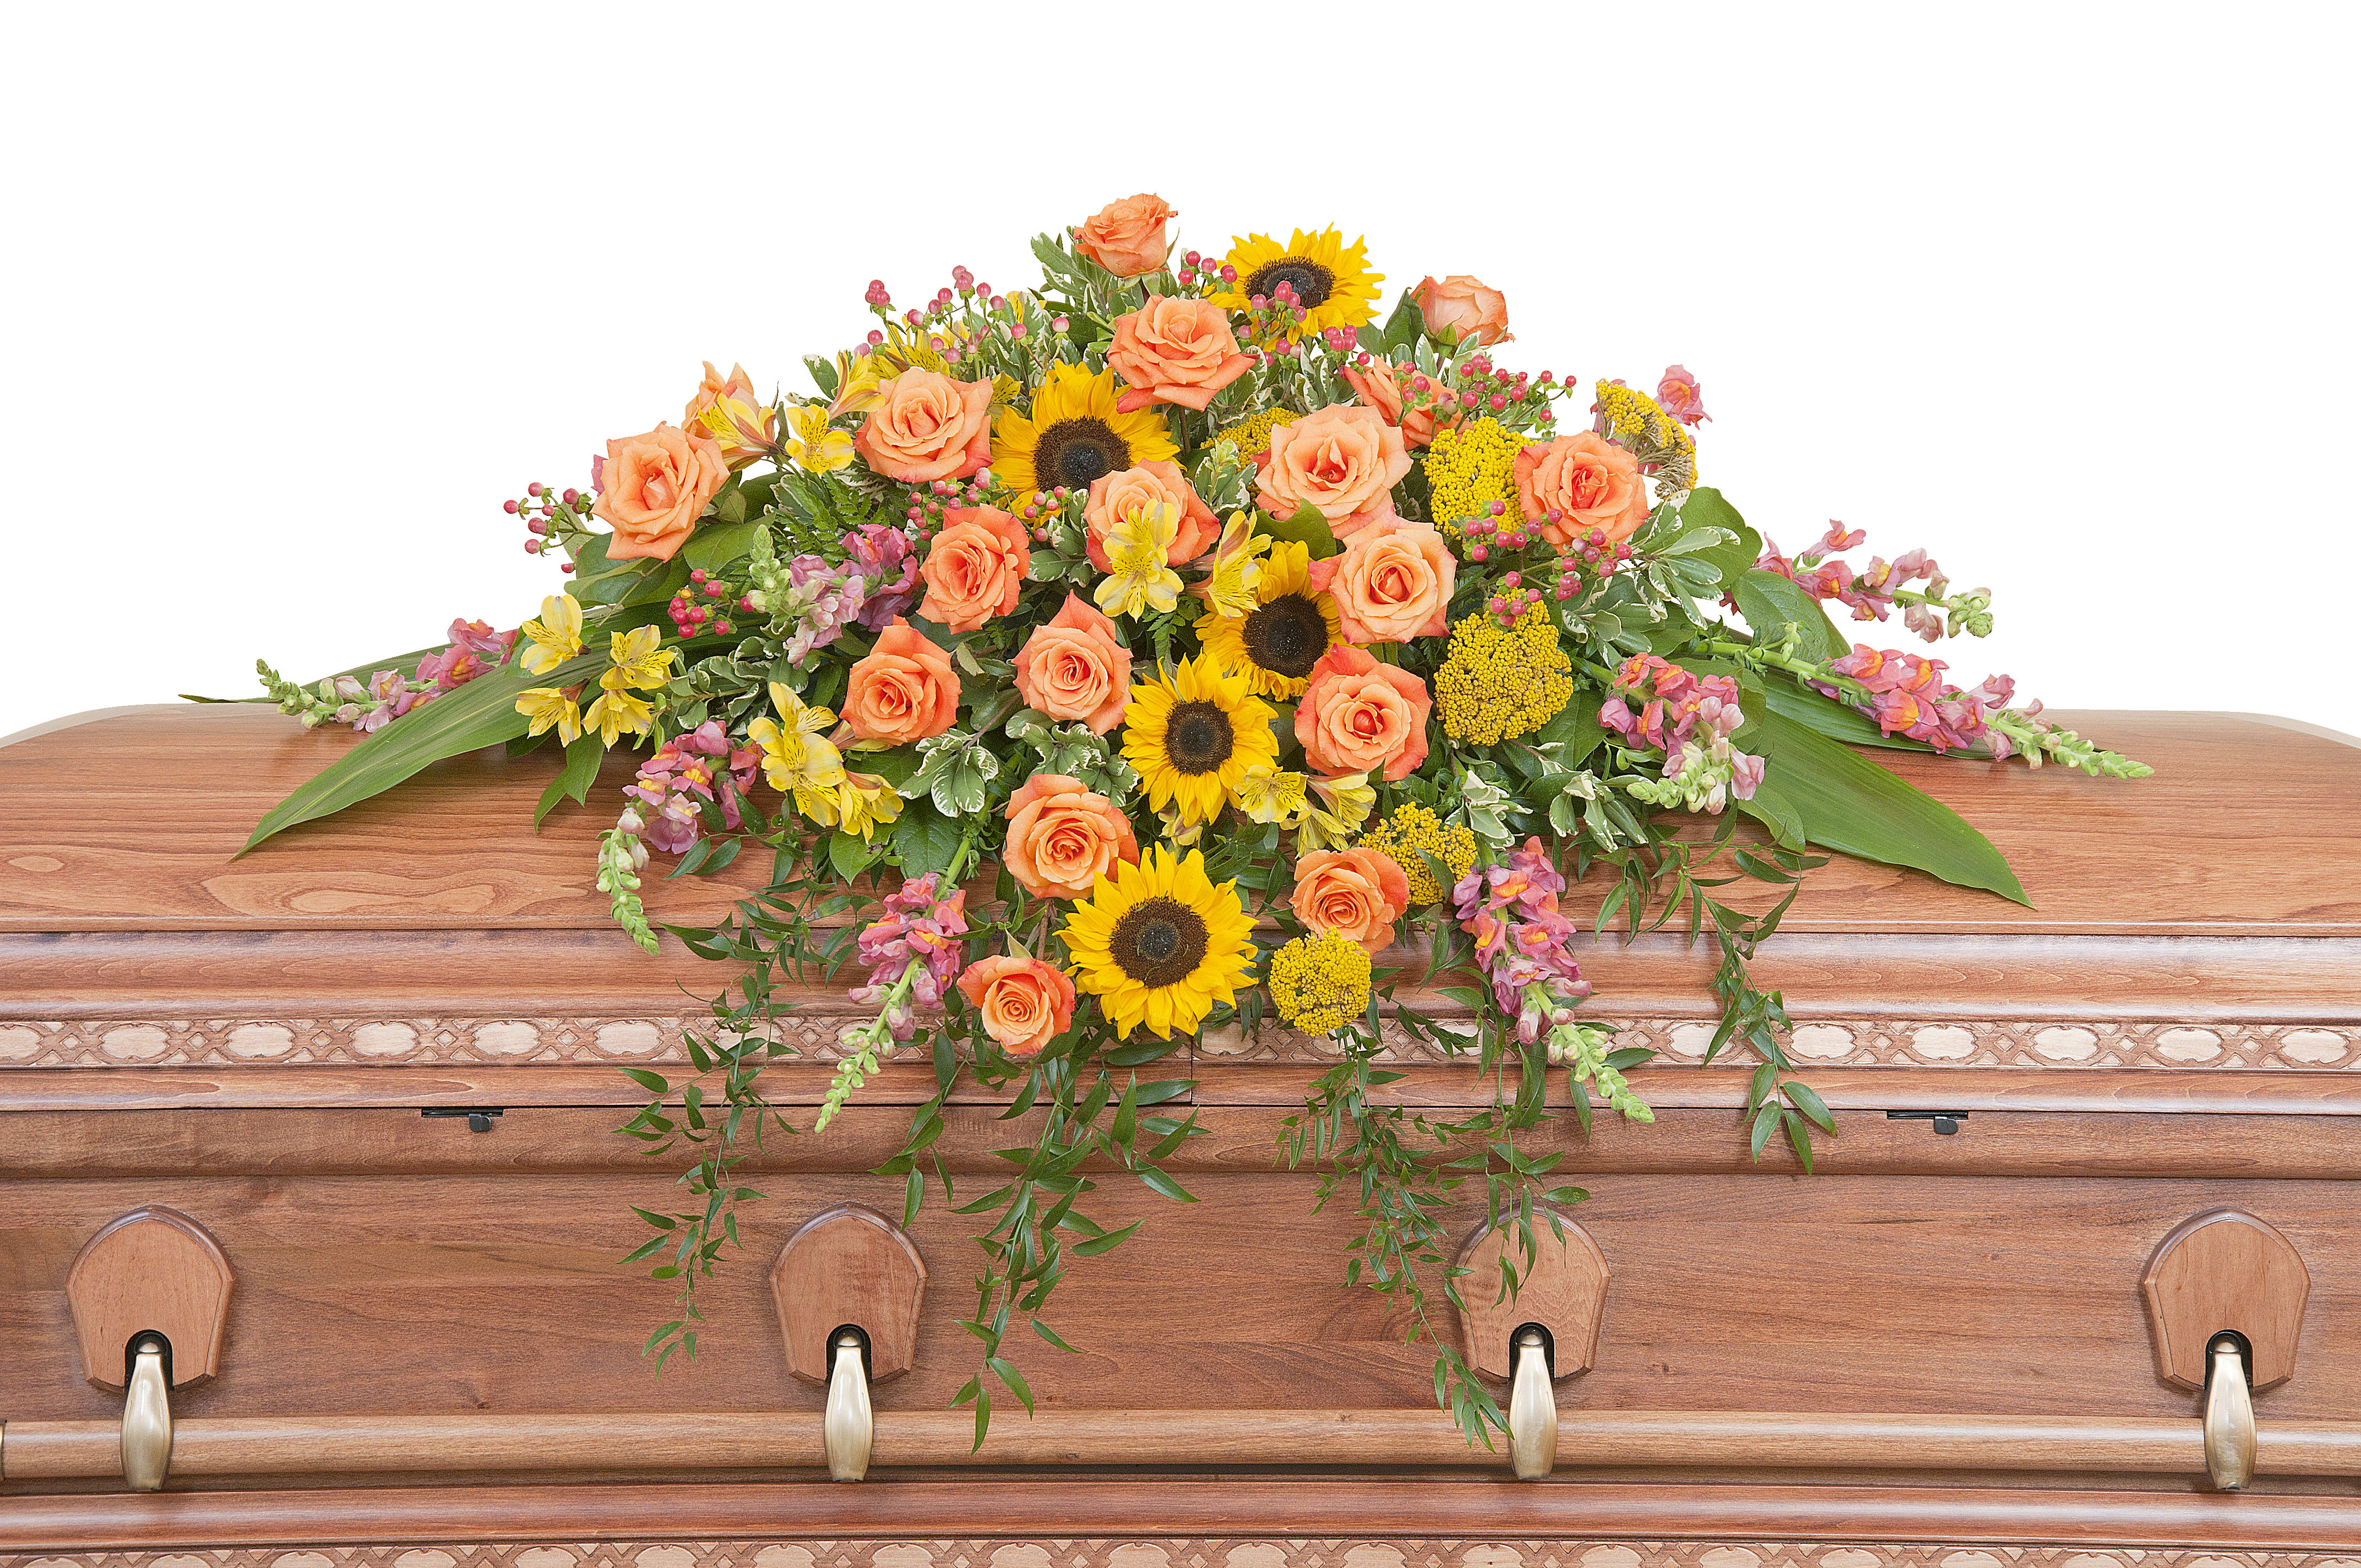 Heaven's Sunset Casket Spray TMF-702 - The colors of sunset are evident in this beautiful spray of Sunflowers and Roses with accents of other premium flowers and foliage. Approximately 43&quot; wide 36&quot; deep